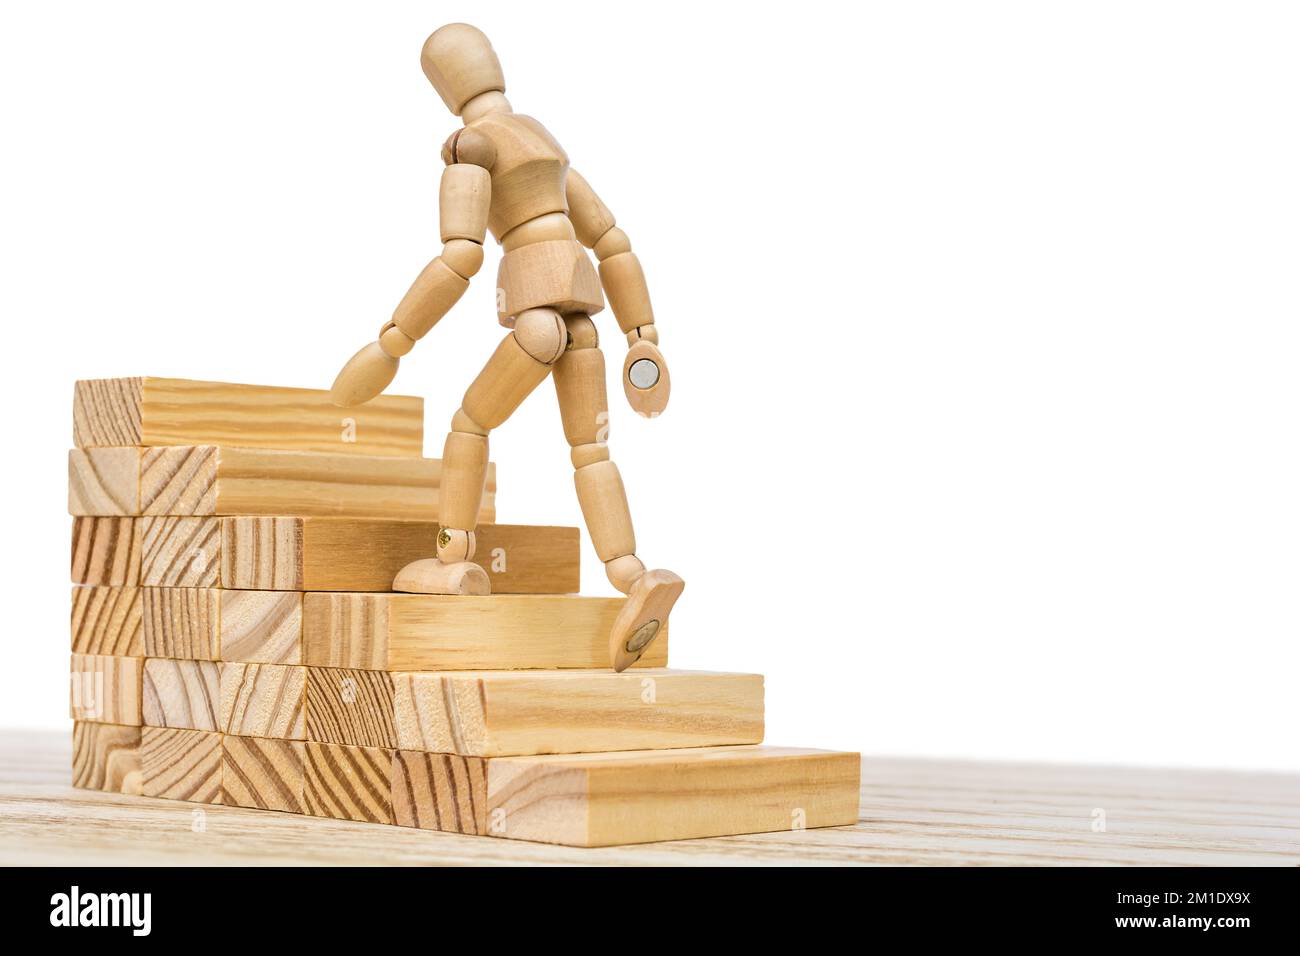 Wooden figure climbs a wooden staircase as a symbol of career advancement Stock Photo